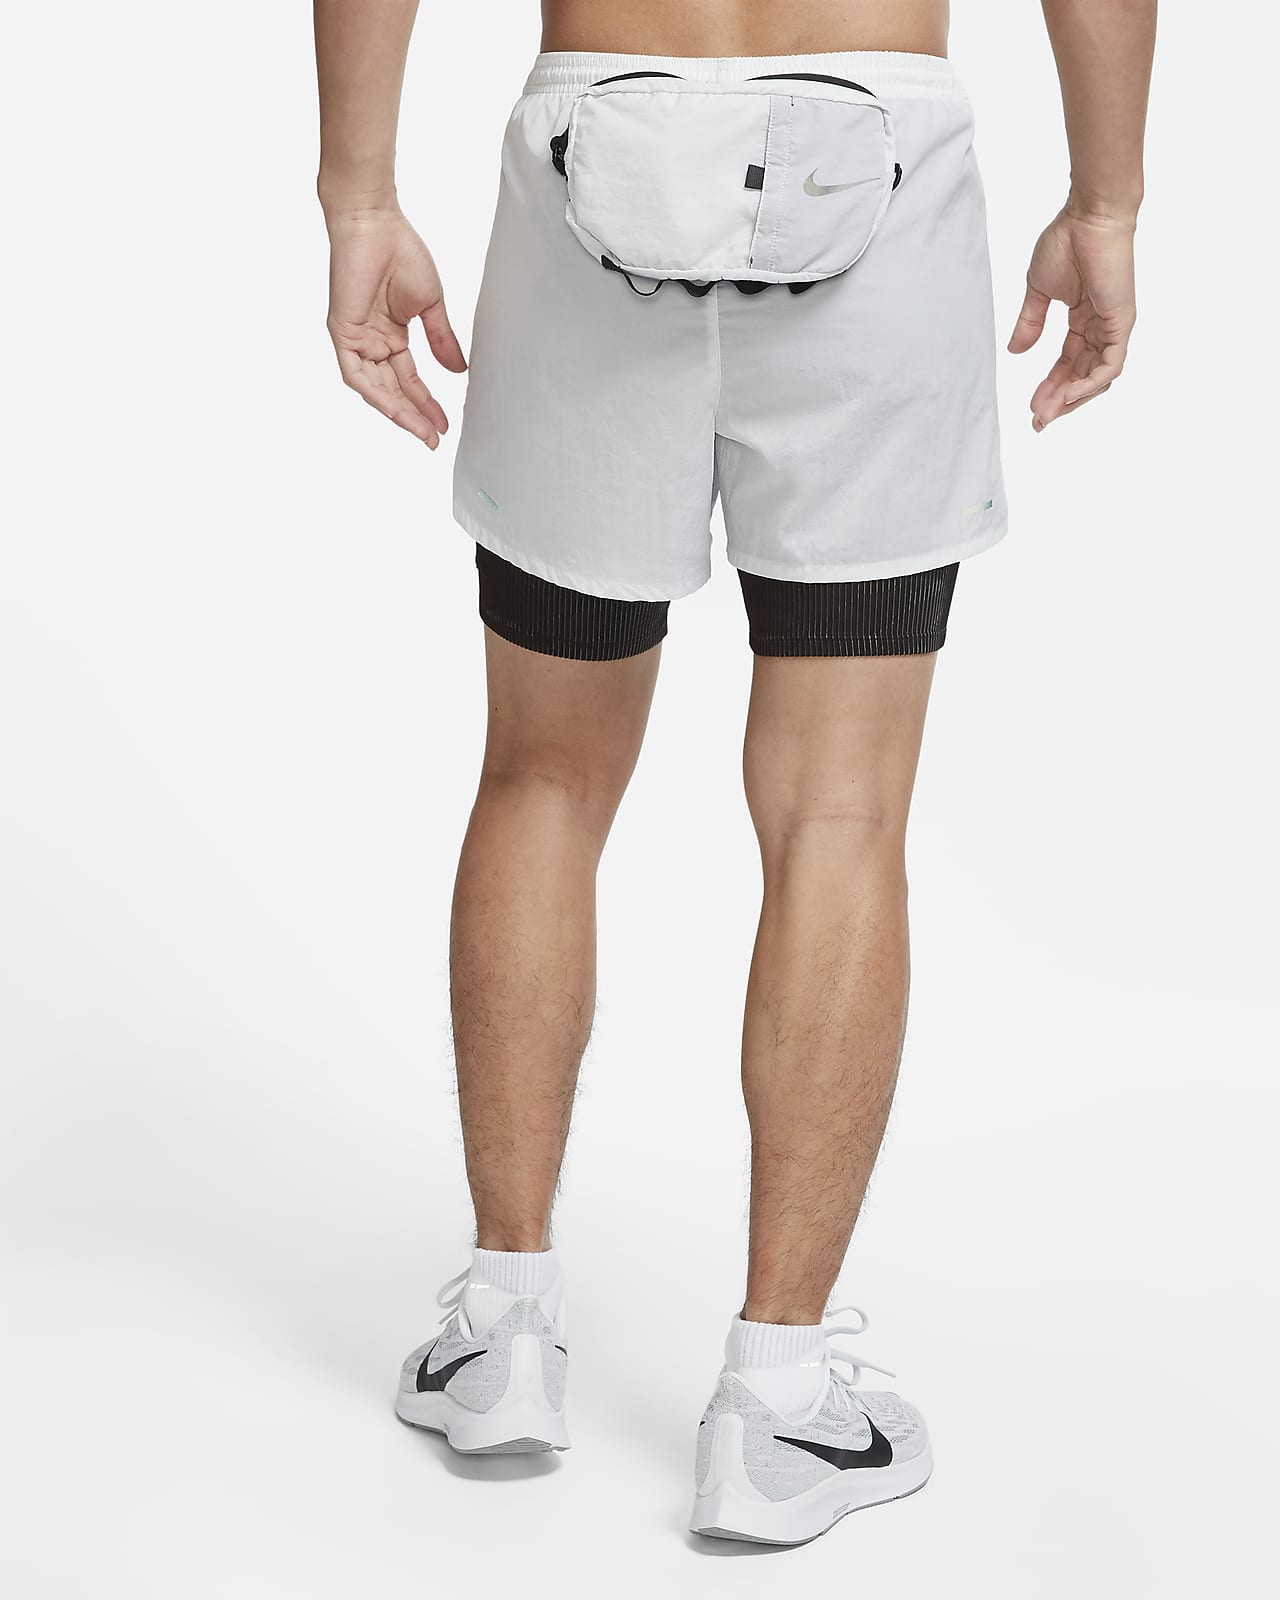 Buy > nike running shorts with zip pockets > in stock